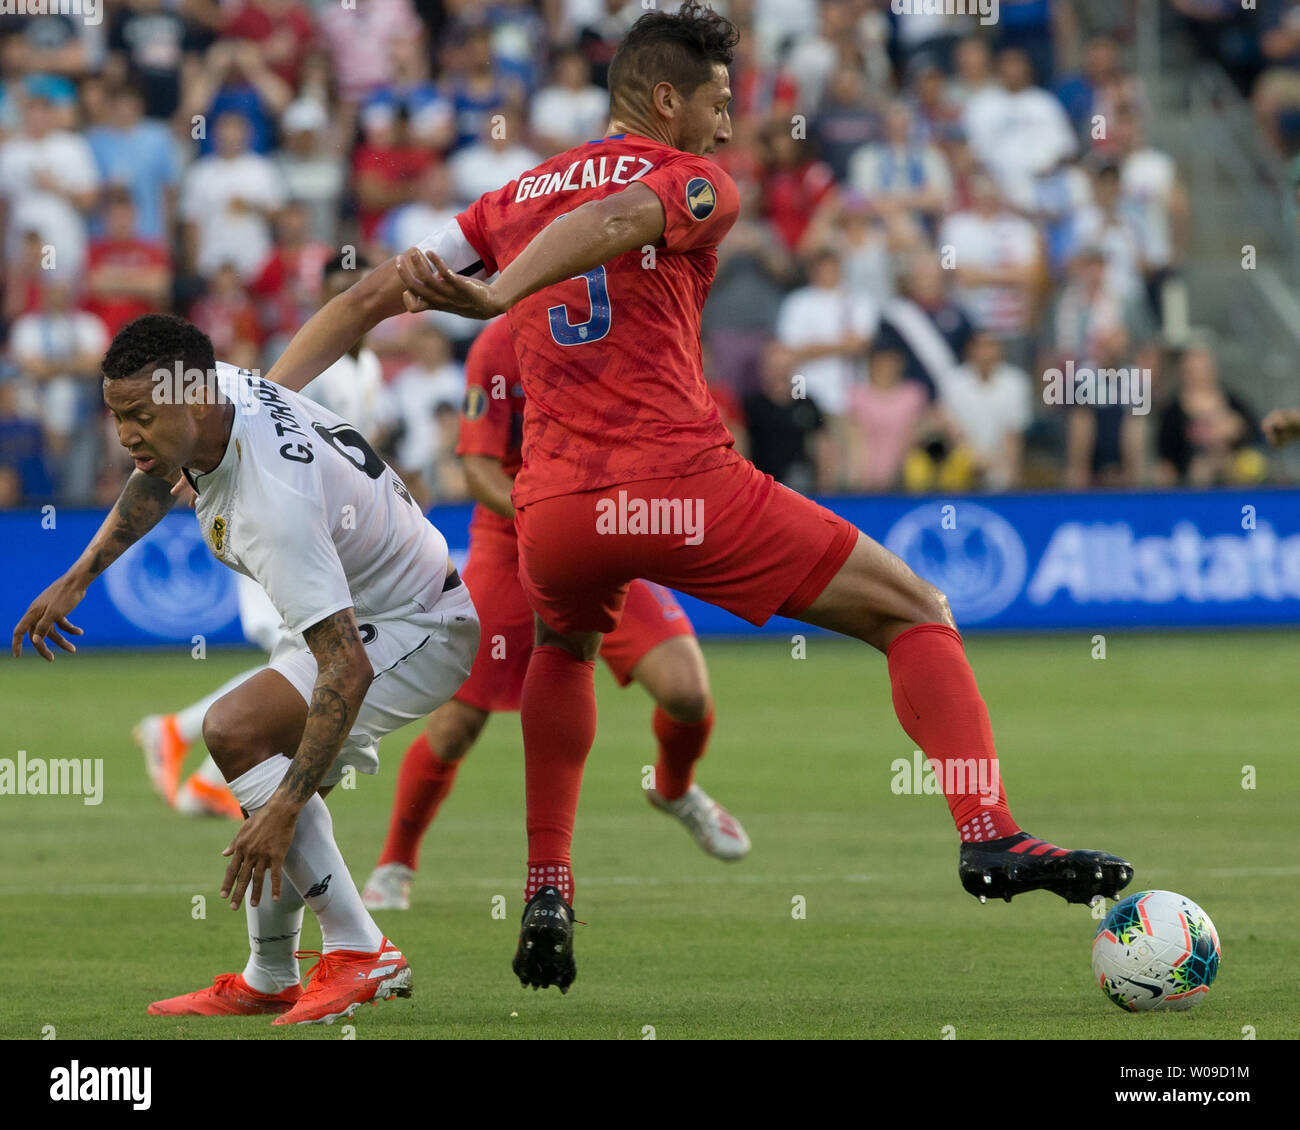 Kansas City, Kansas, USA. 25th June, 2019. USMNT defender Omar Gonzalez #3 (r) gains the defense over Panama forward Gabriel Torres #9 (l) during the first half of the game. Credit: Serena S.Y. Hsu/ZUMA Wire/Alamy Live News Stock Photo